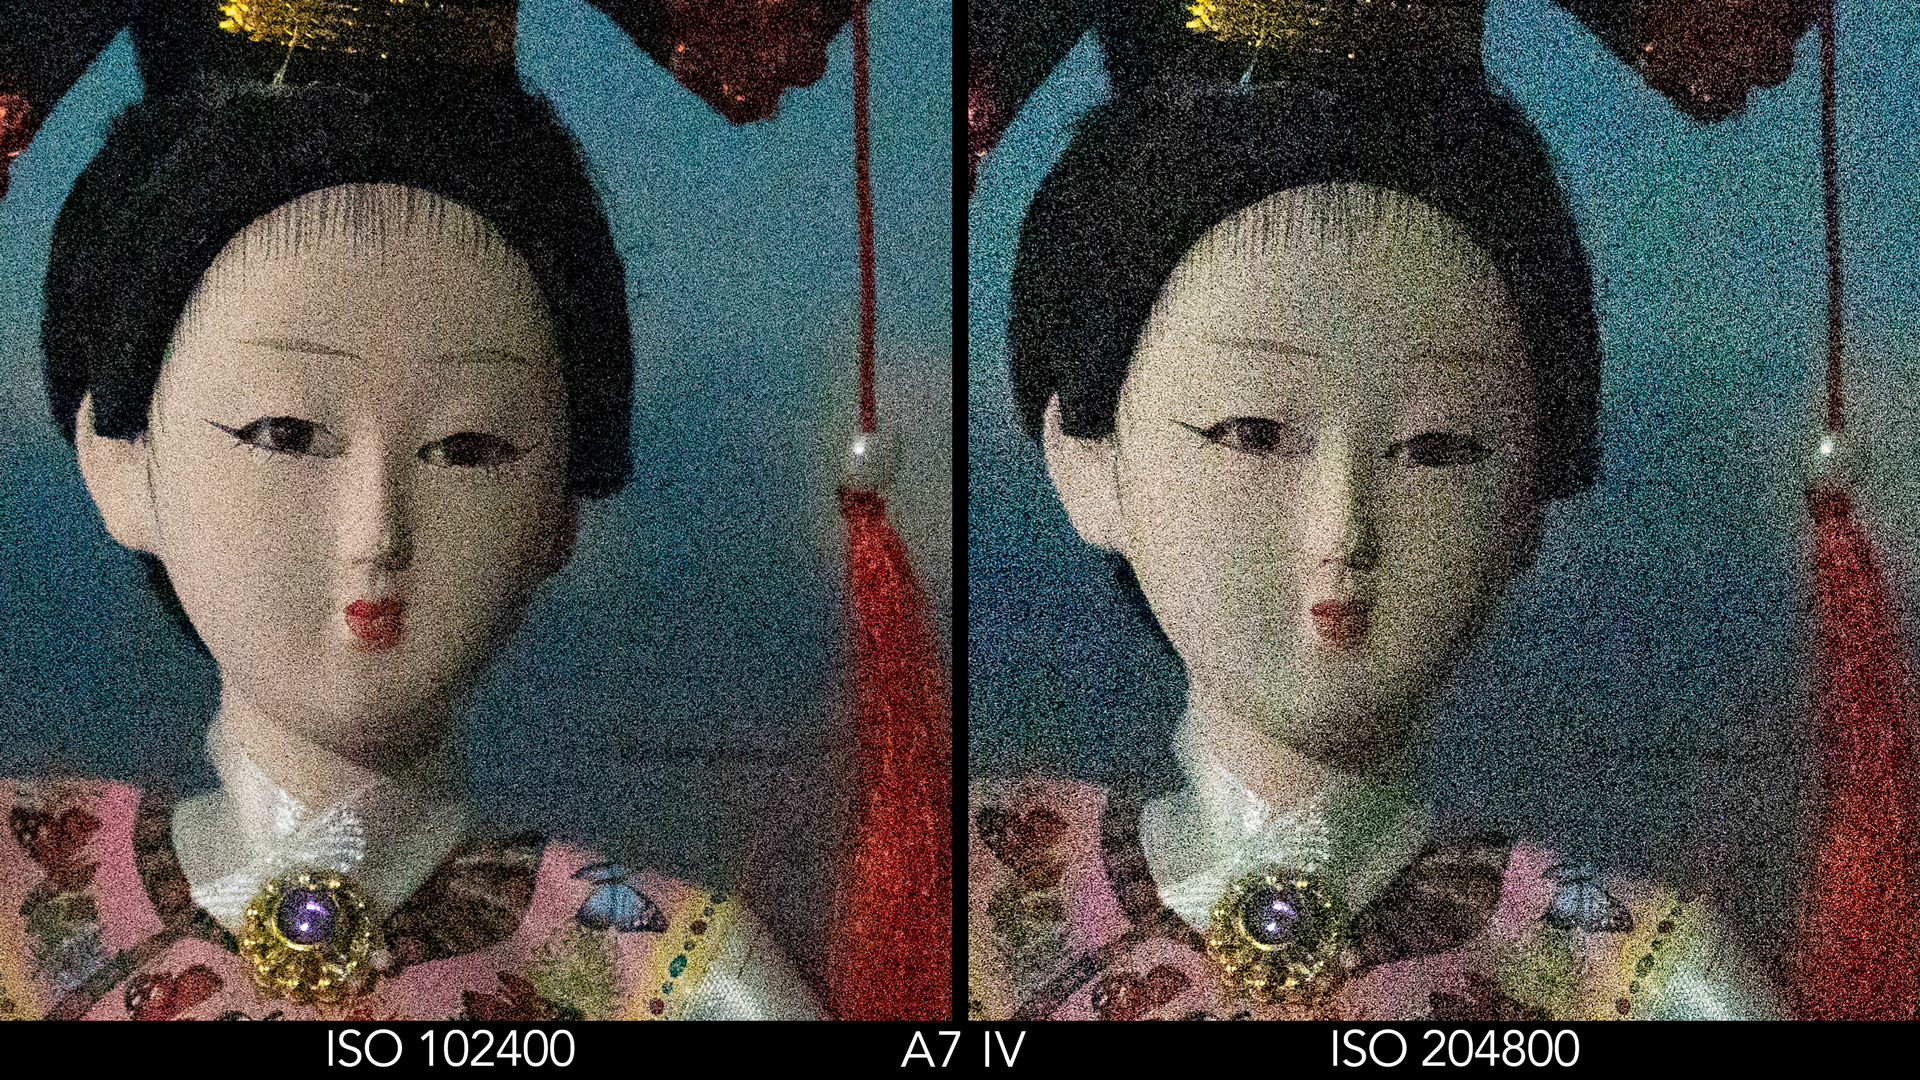 Side by side crop showing the quality at ISO 102400 and 204800 for the A7 IV